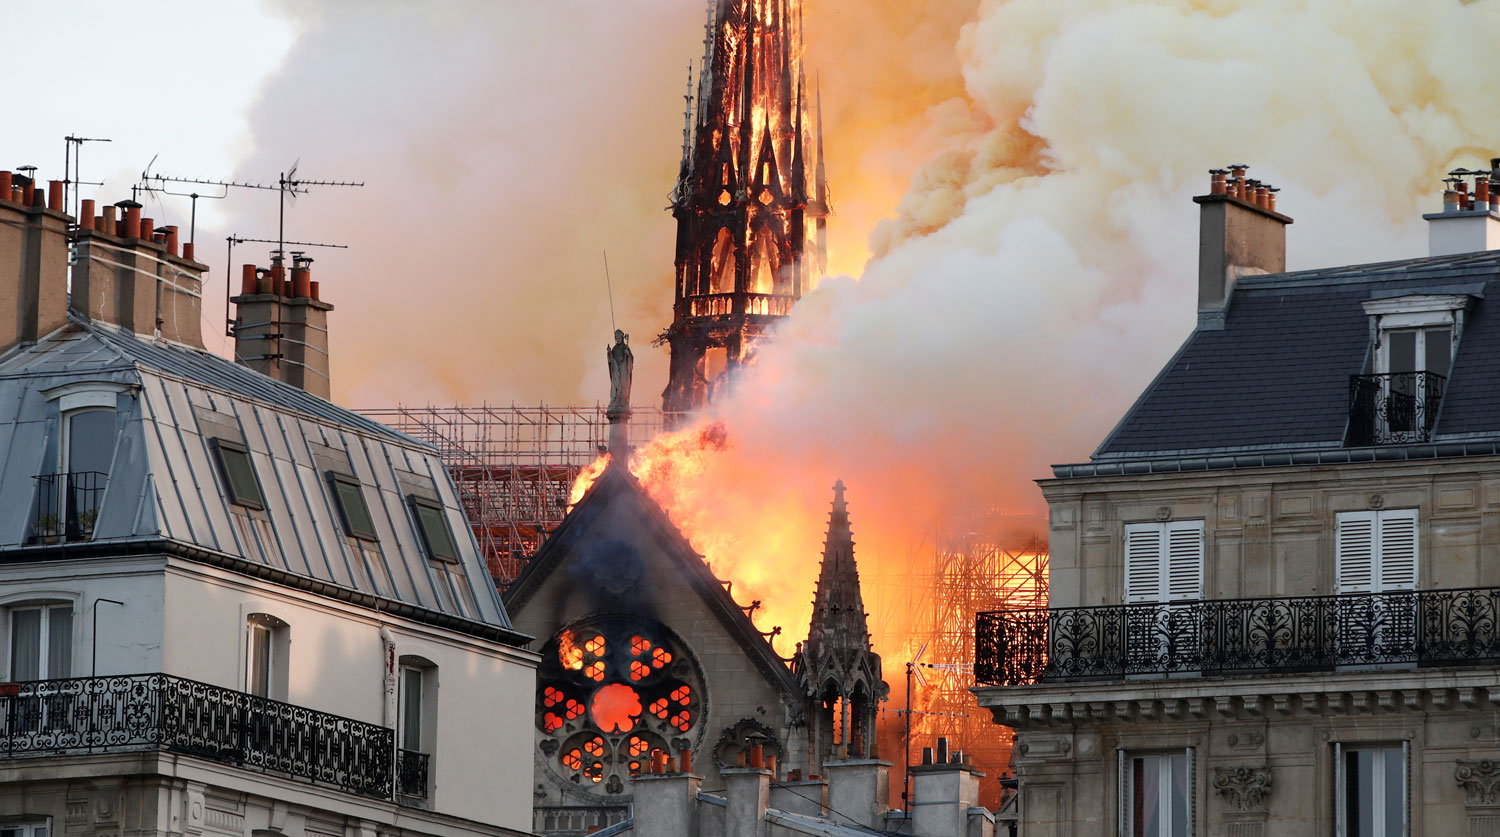 Smoke billows as fire engulfs the spire of Notre Dame Cathedral in Paris, France April 15, 2019. REUTERS/Benoit Tessier - RC19CF540000